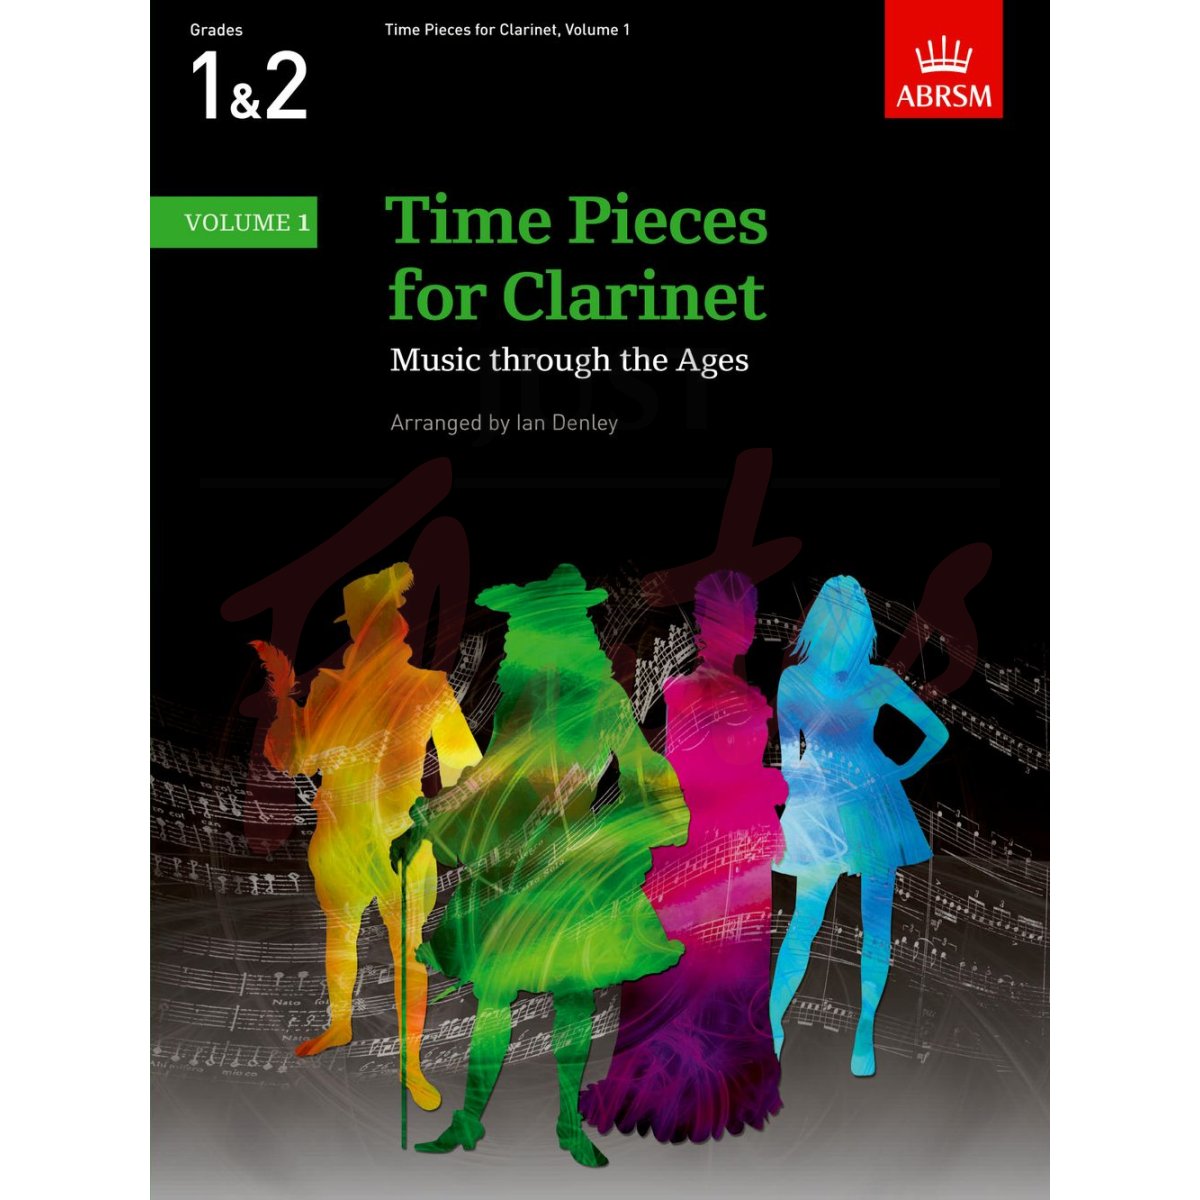 Time Pieces for Clarinet